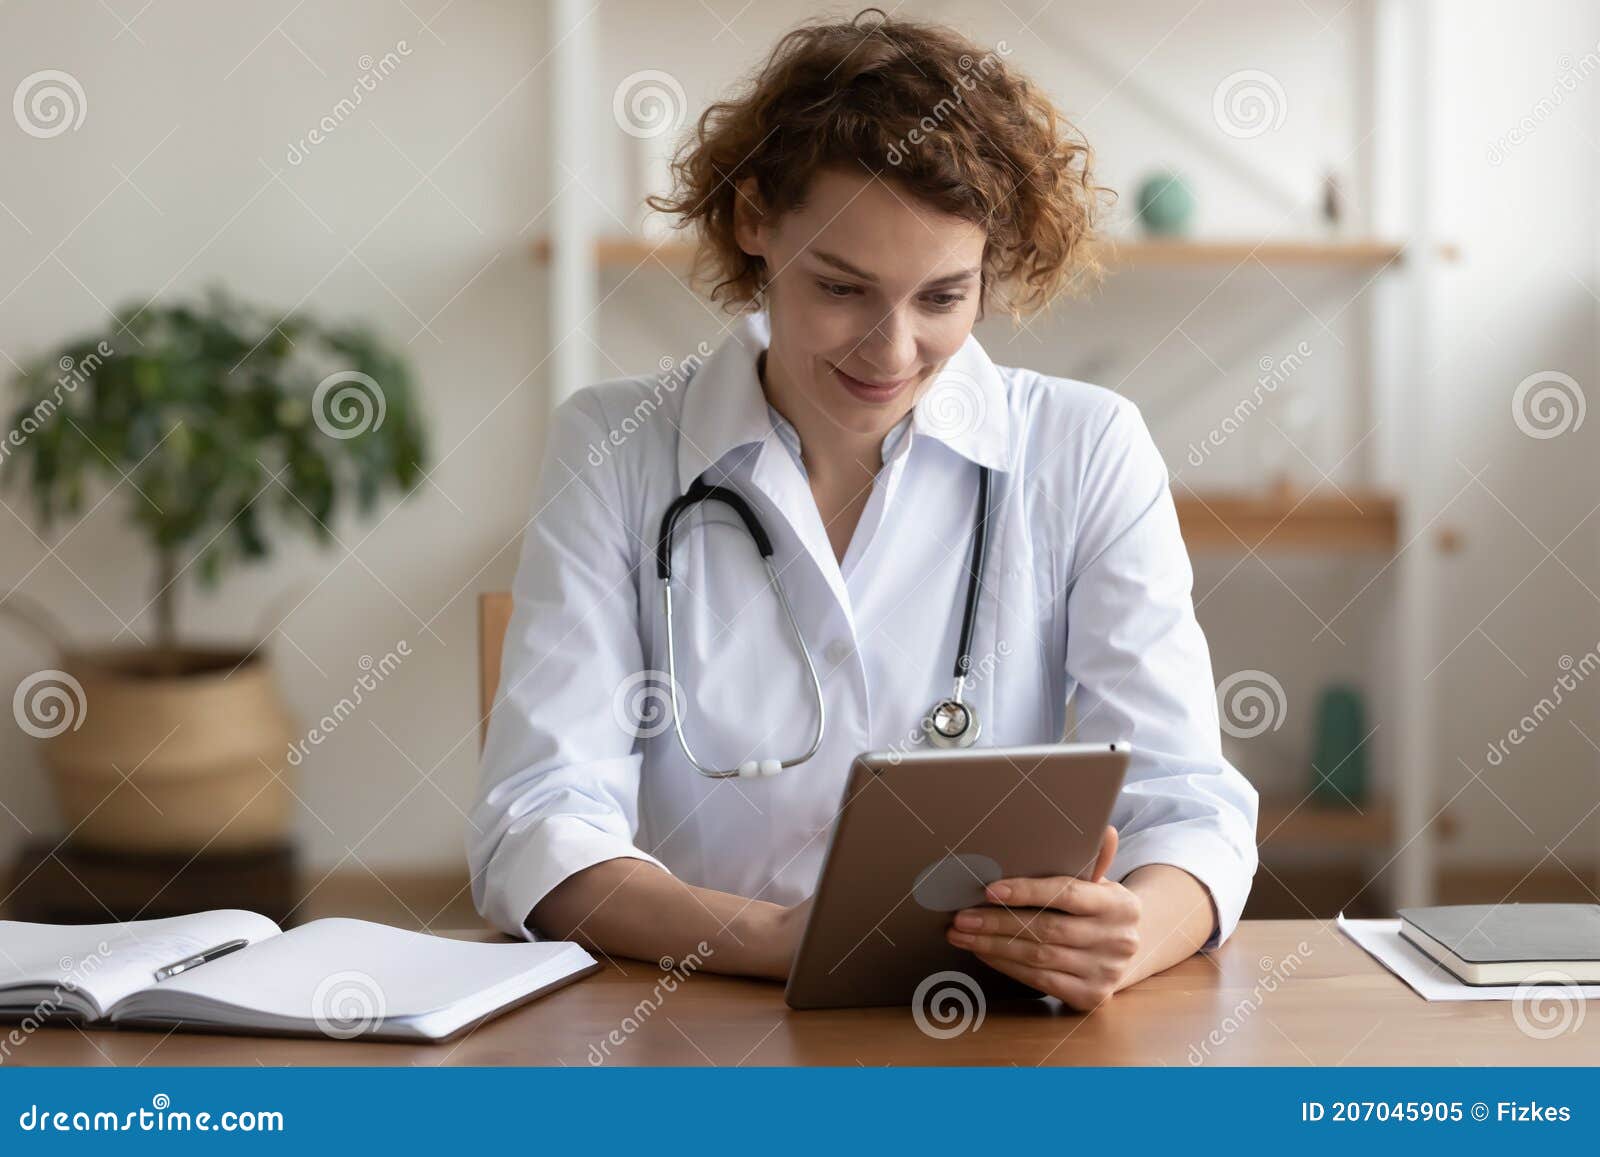 happy young female general practitioner using digital computer tablet.